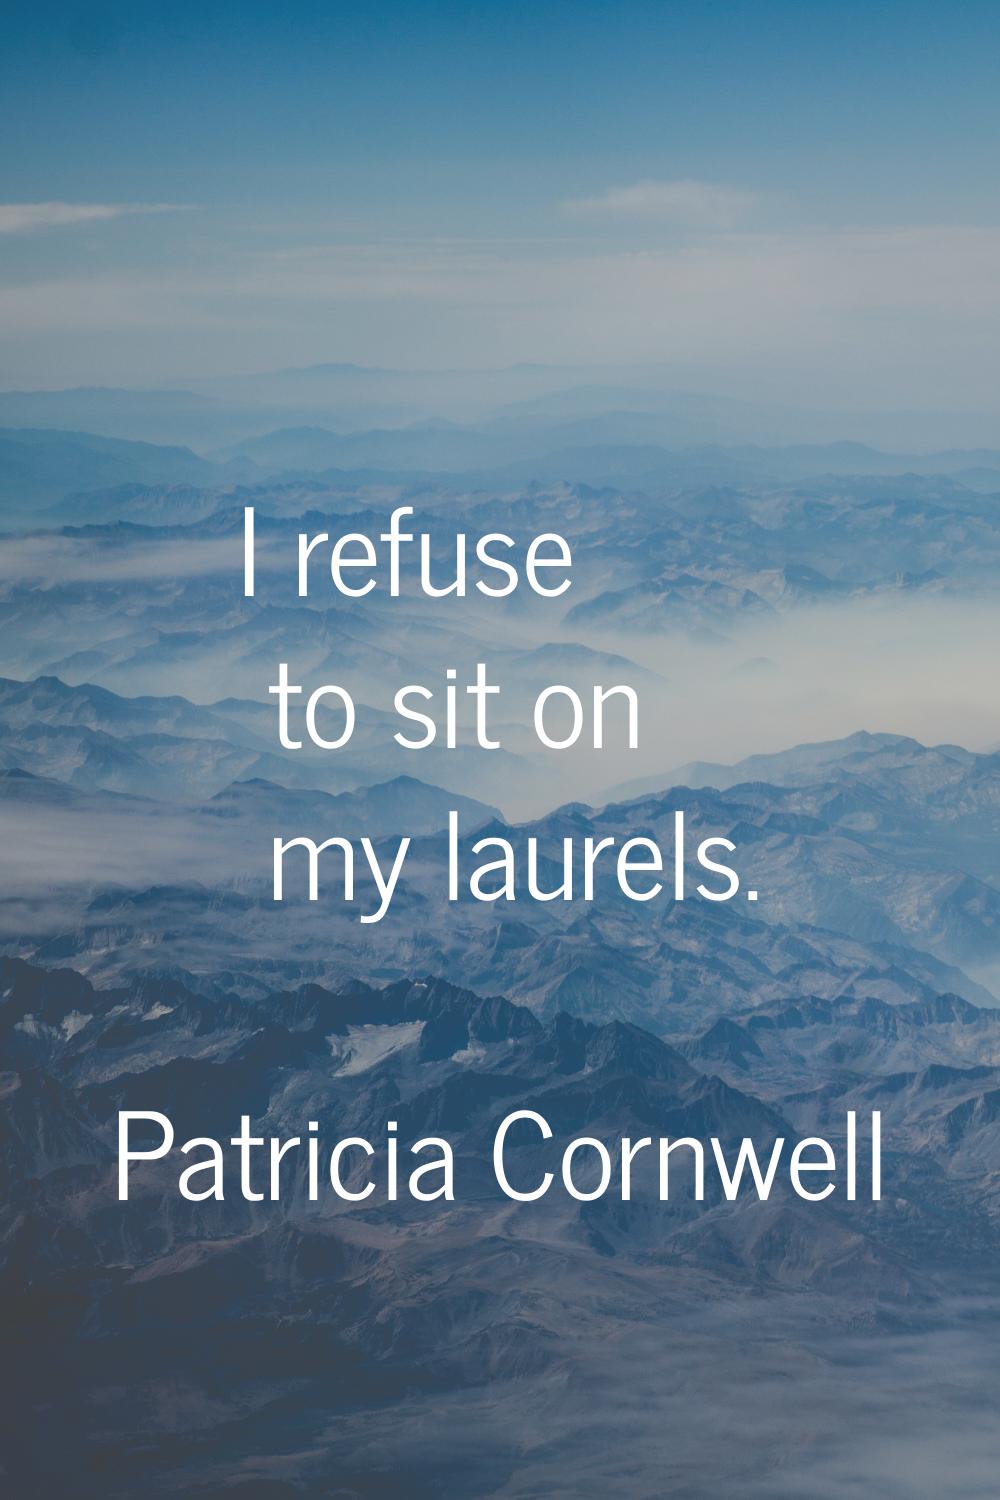 I refuse to sit on my laurels.